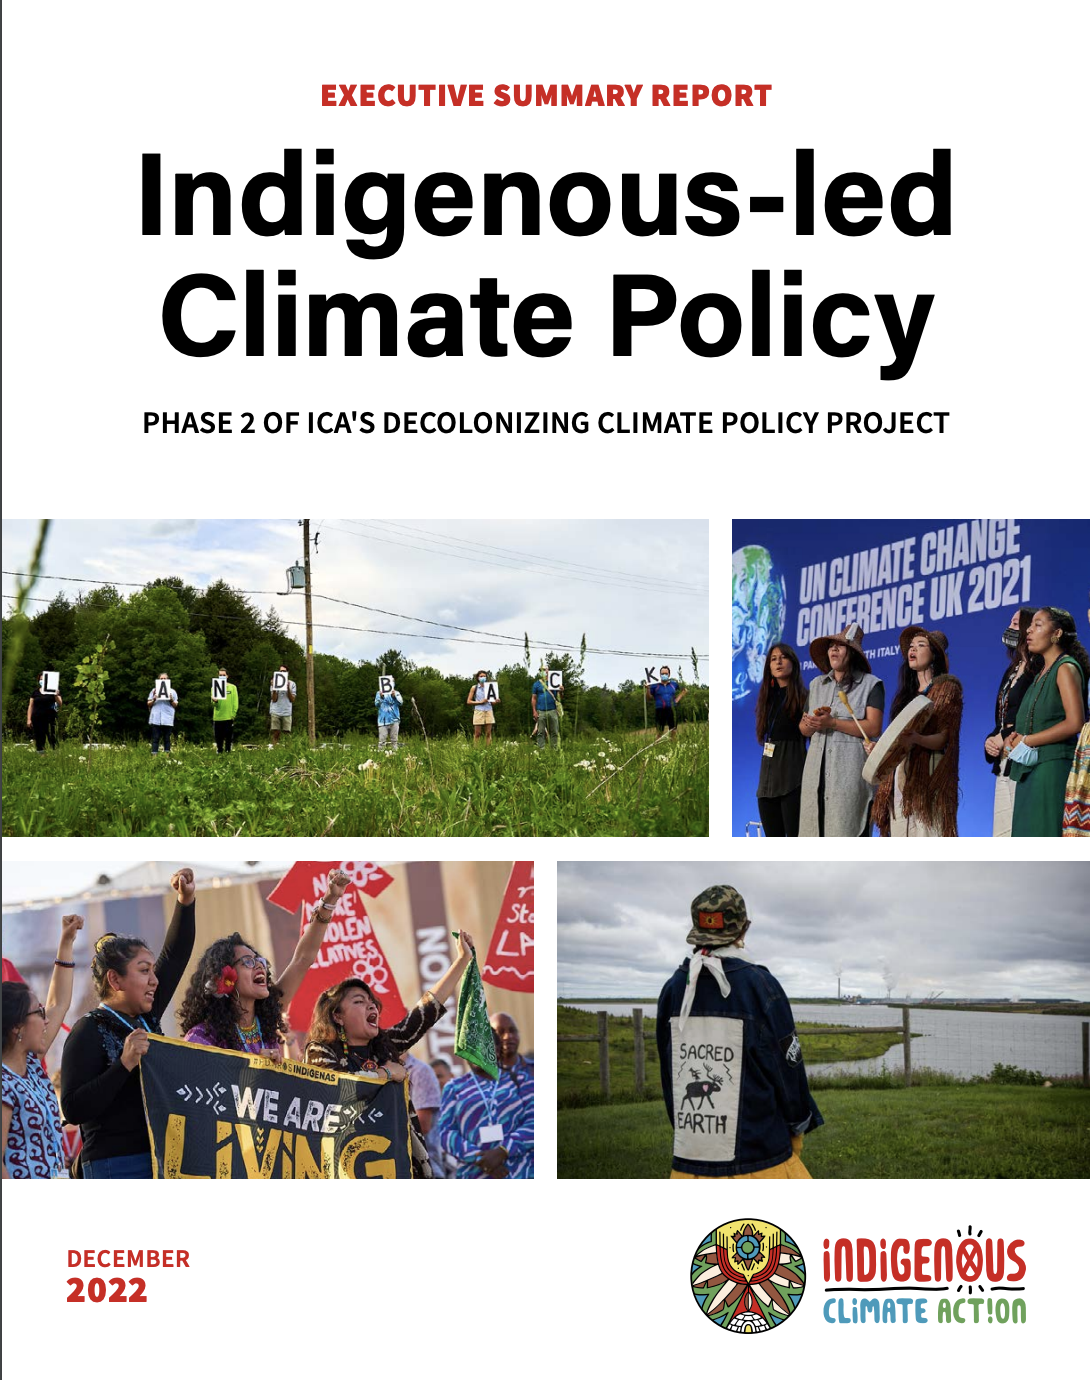 Cover of Indigenous-led Climate Policy Executive Summary